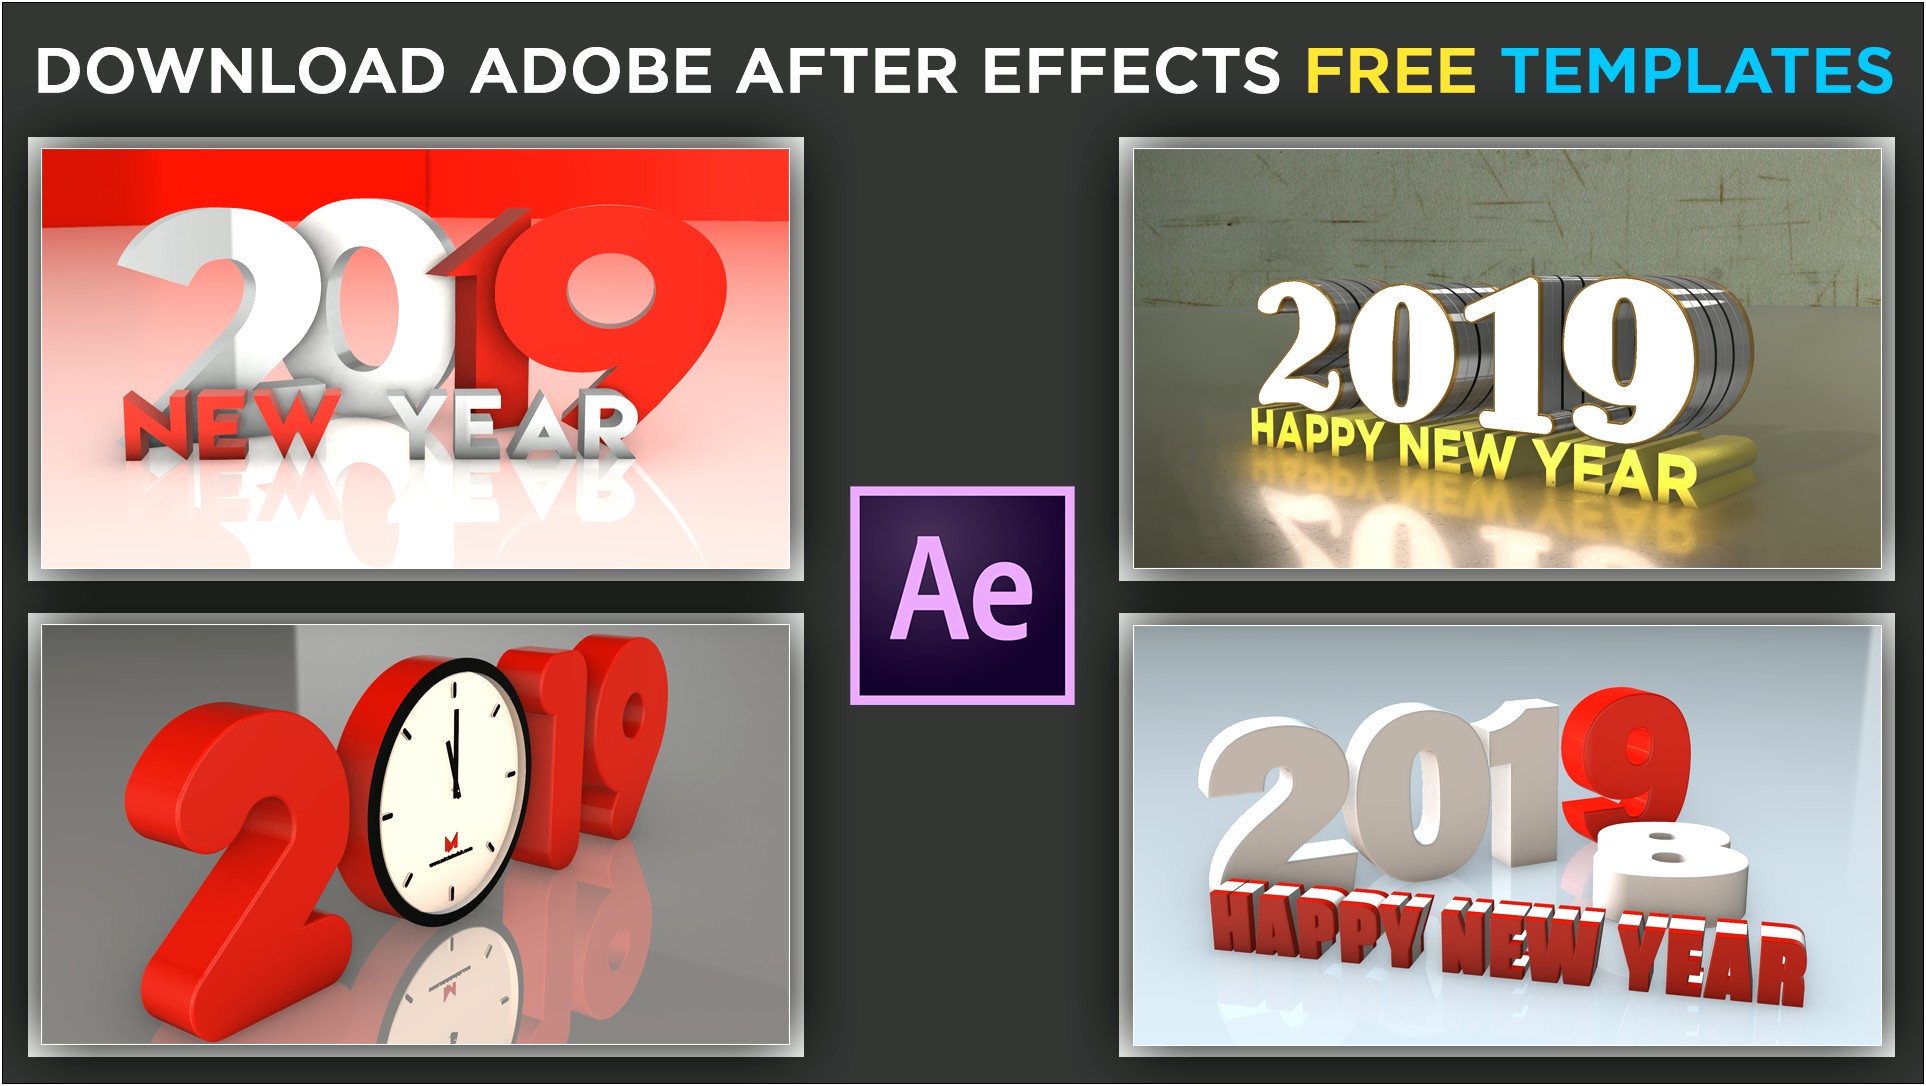 Adobe After Effects Cc Templates Free Download